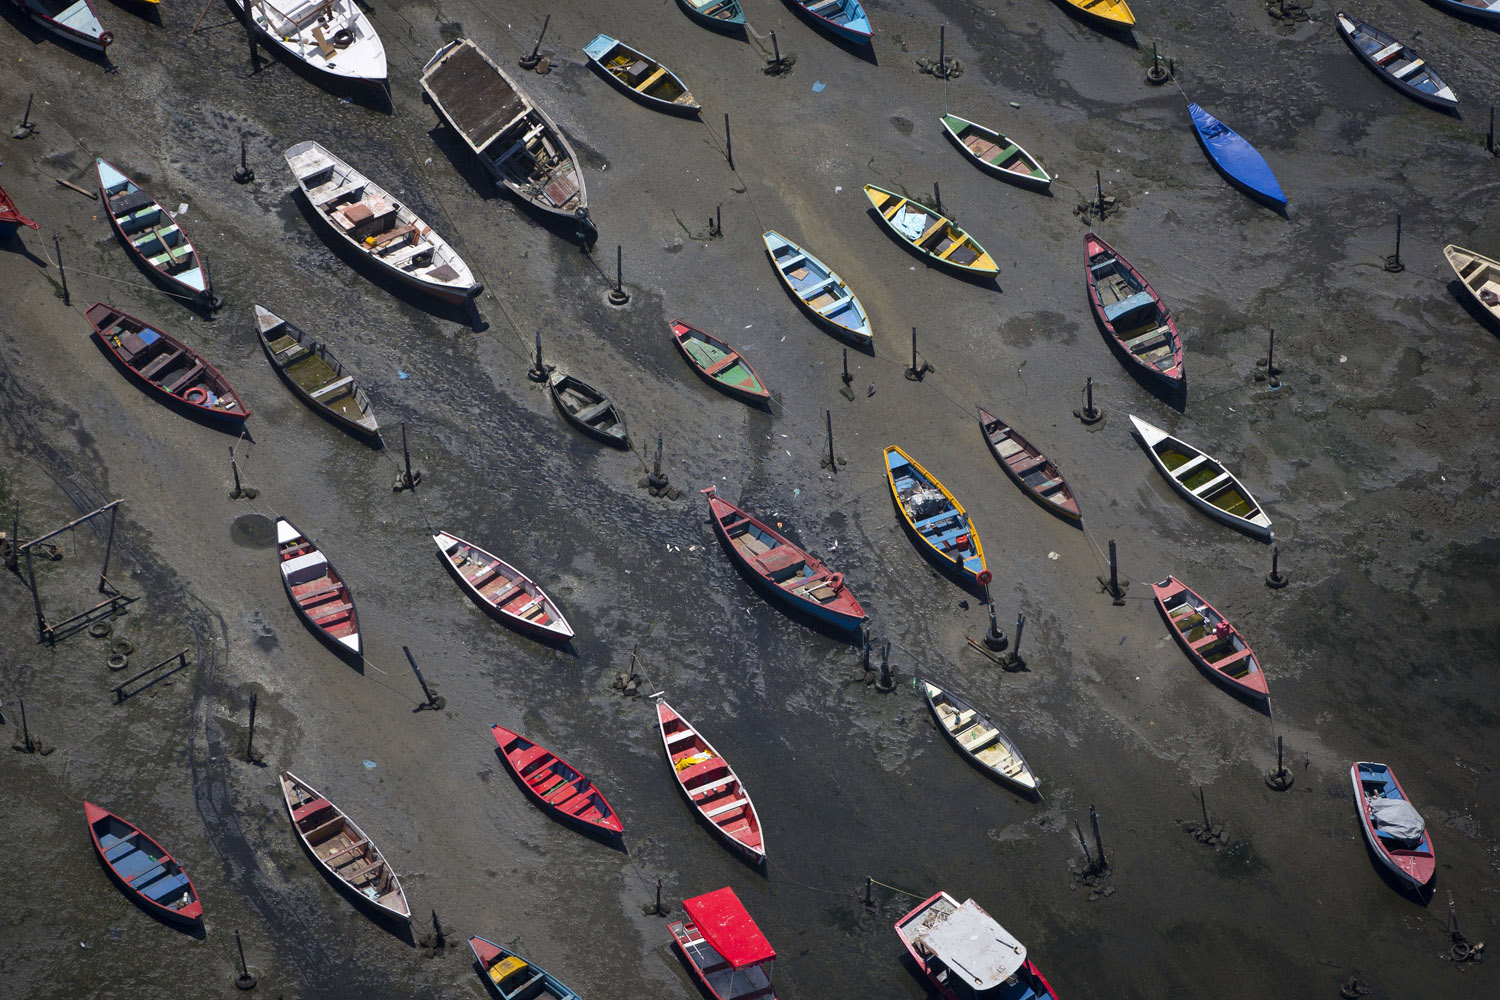 Nov. 19, 2013. Small boats sit on the shore of Guanabara Bay in the suburb of Sao Goncalo, across the bay from Rio de Janeiro, Brazil.